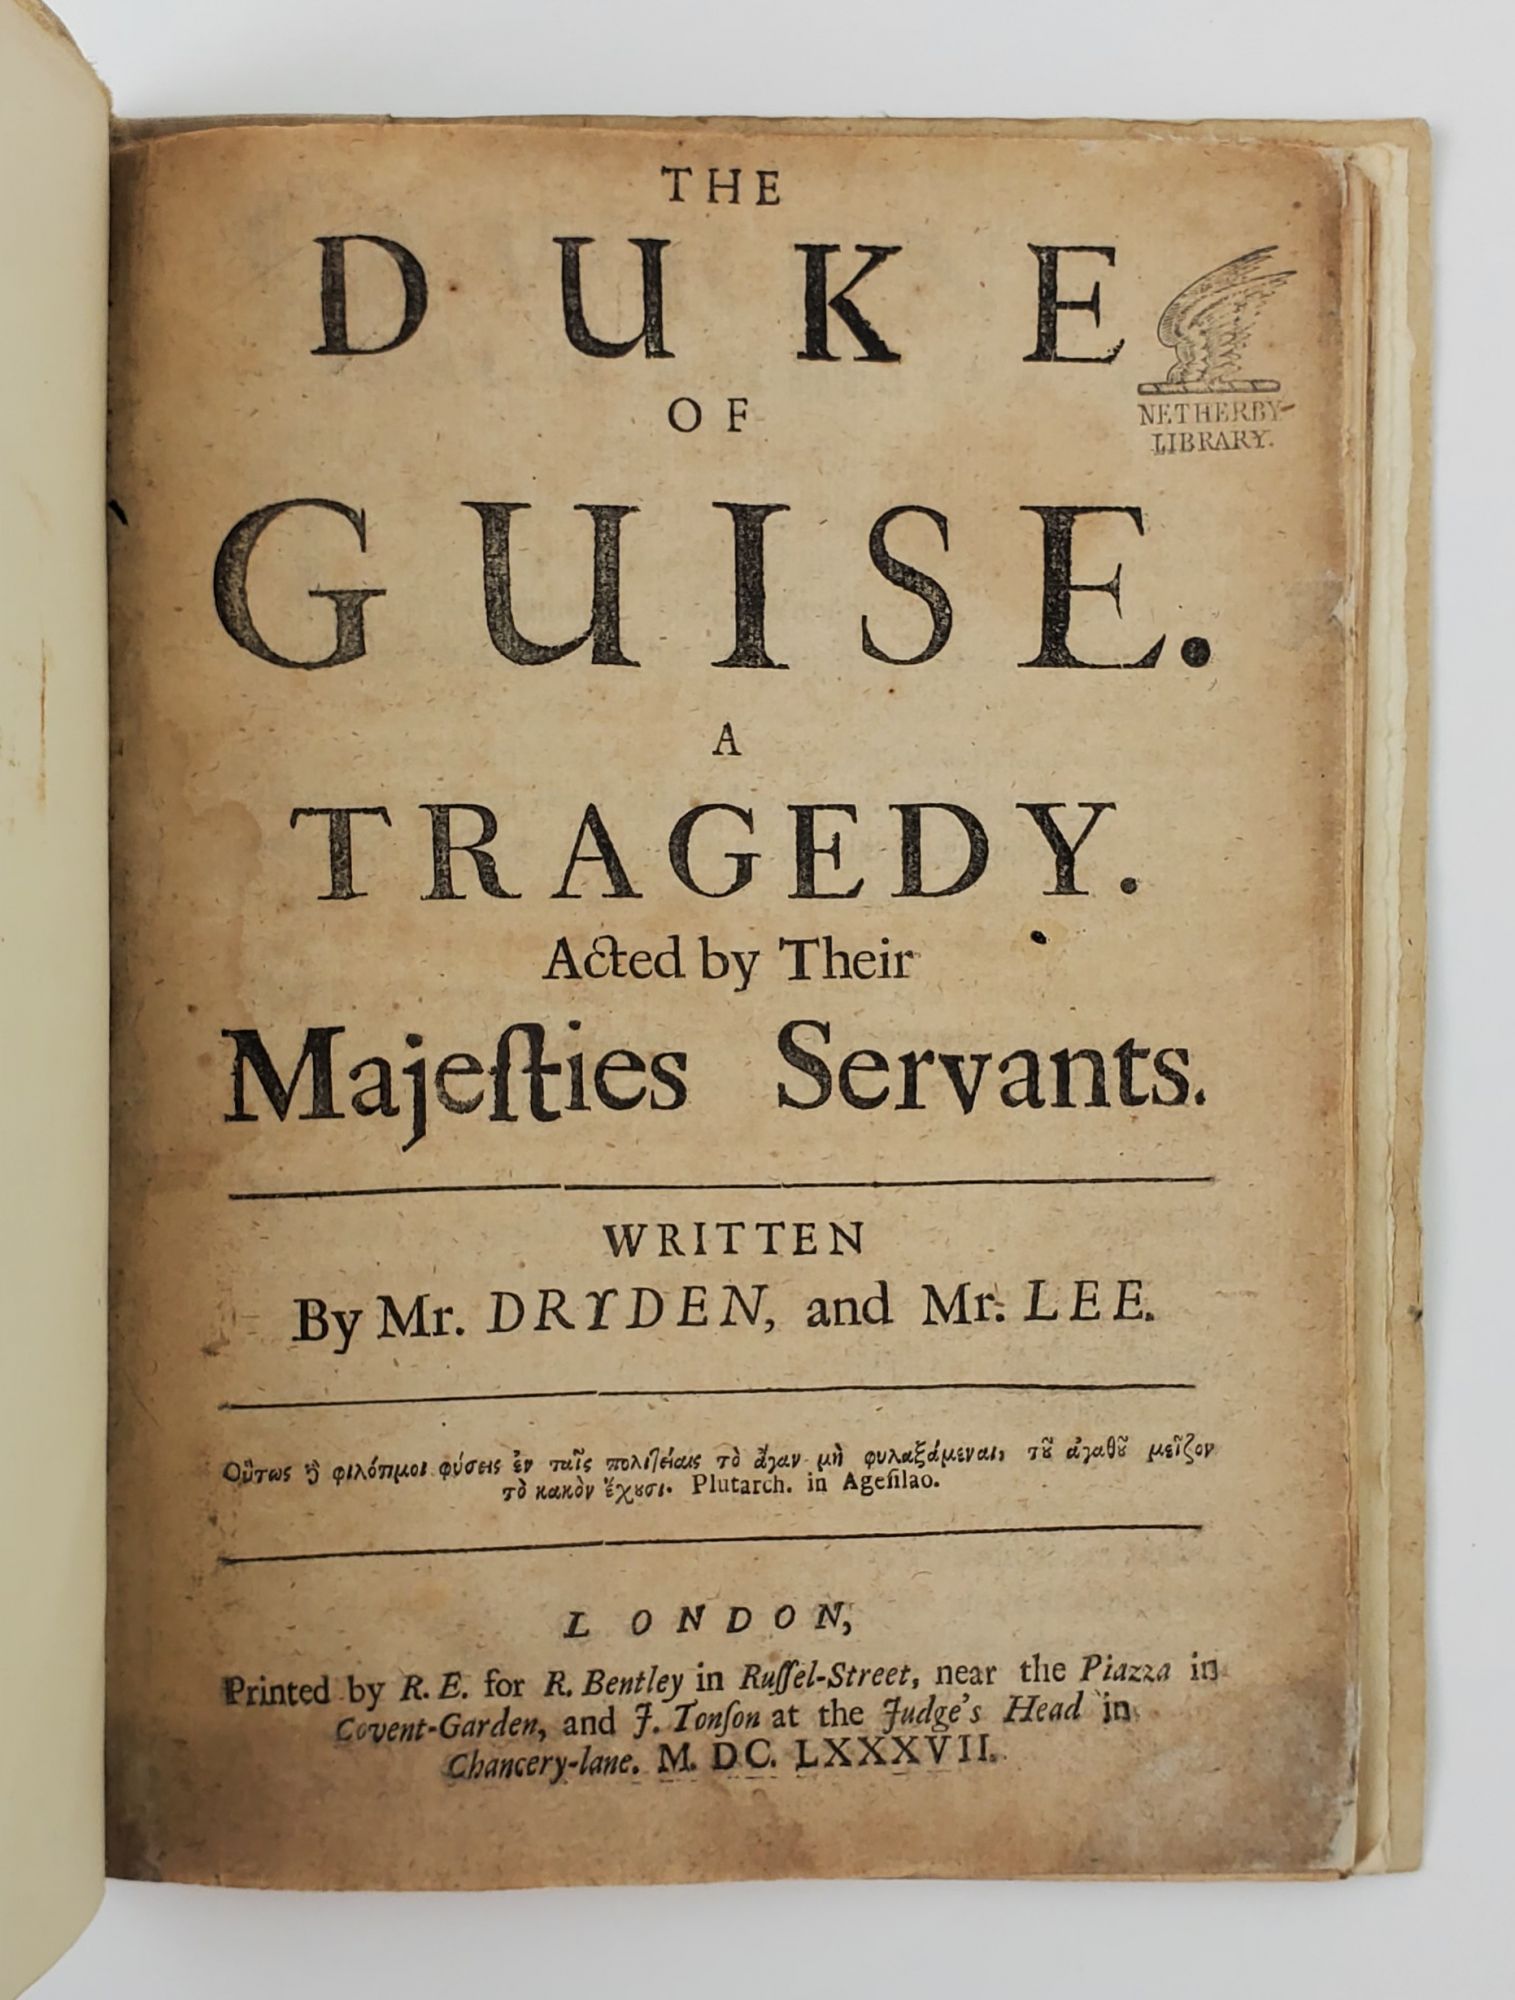 Product Image for THE DUKE OF GUISE. A TRAGEDY. ACTED BY THEIR MAJESTIES SERVANTS